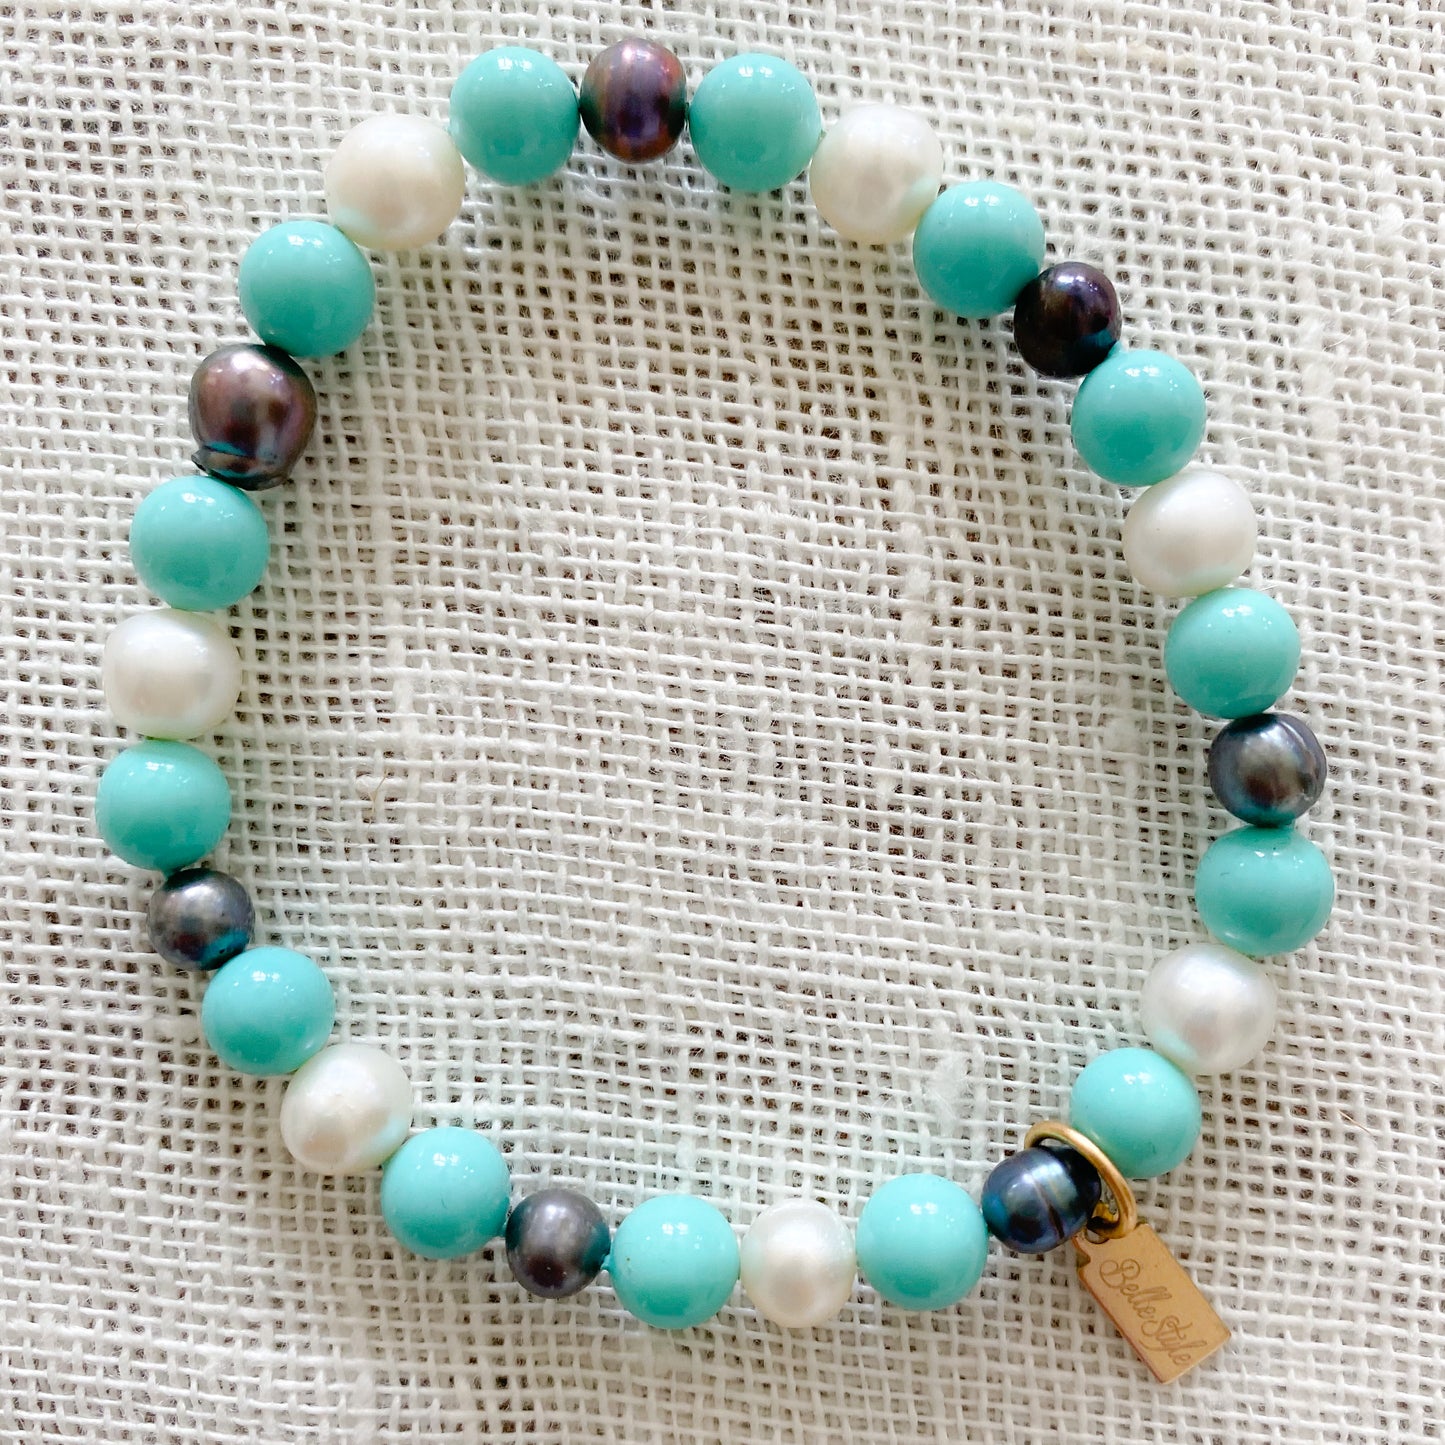 Didi Freshwater Pearl Bracelet - Bellestyle turquoise black white mother of pearl stretch